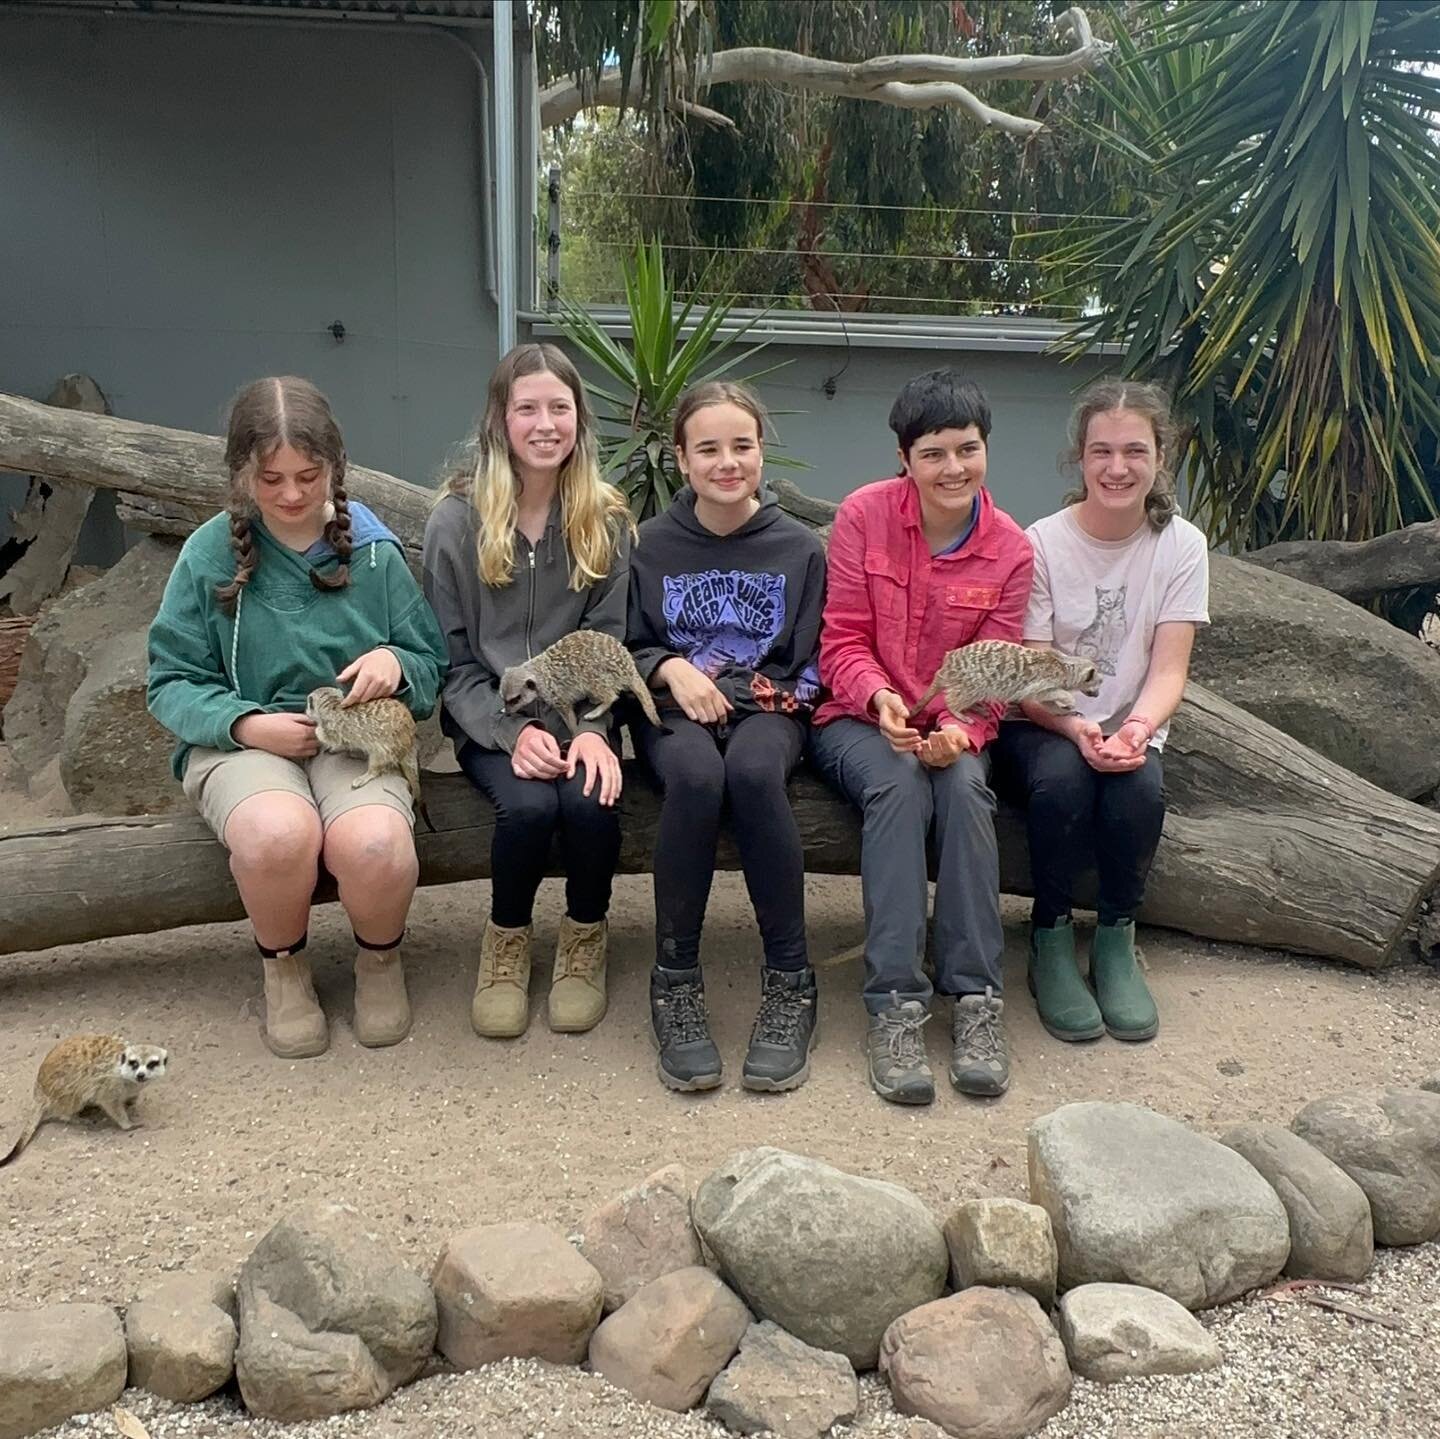 We had lots of giggles and laughs during our Meerkat encounter at @hallsgapzoo . These pesky boys were all full of character and had classic brotherly arguments over food. You can see from the smiles that it was wildly fun!